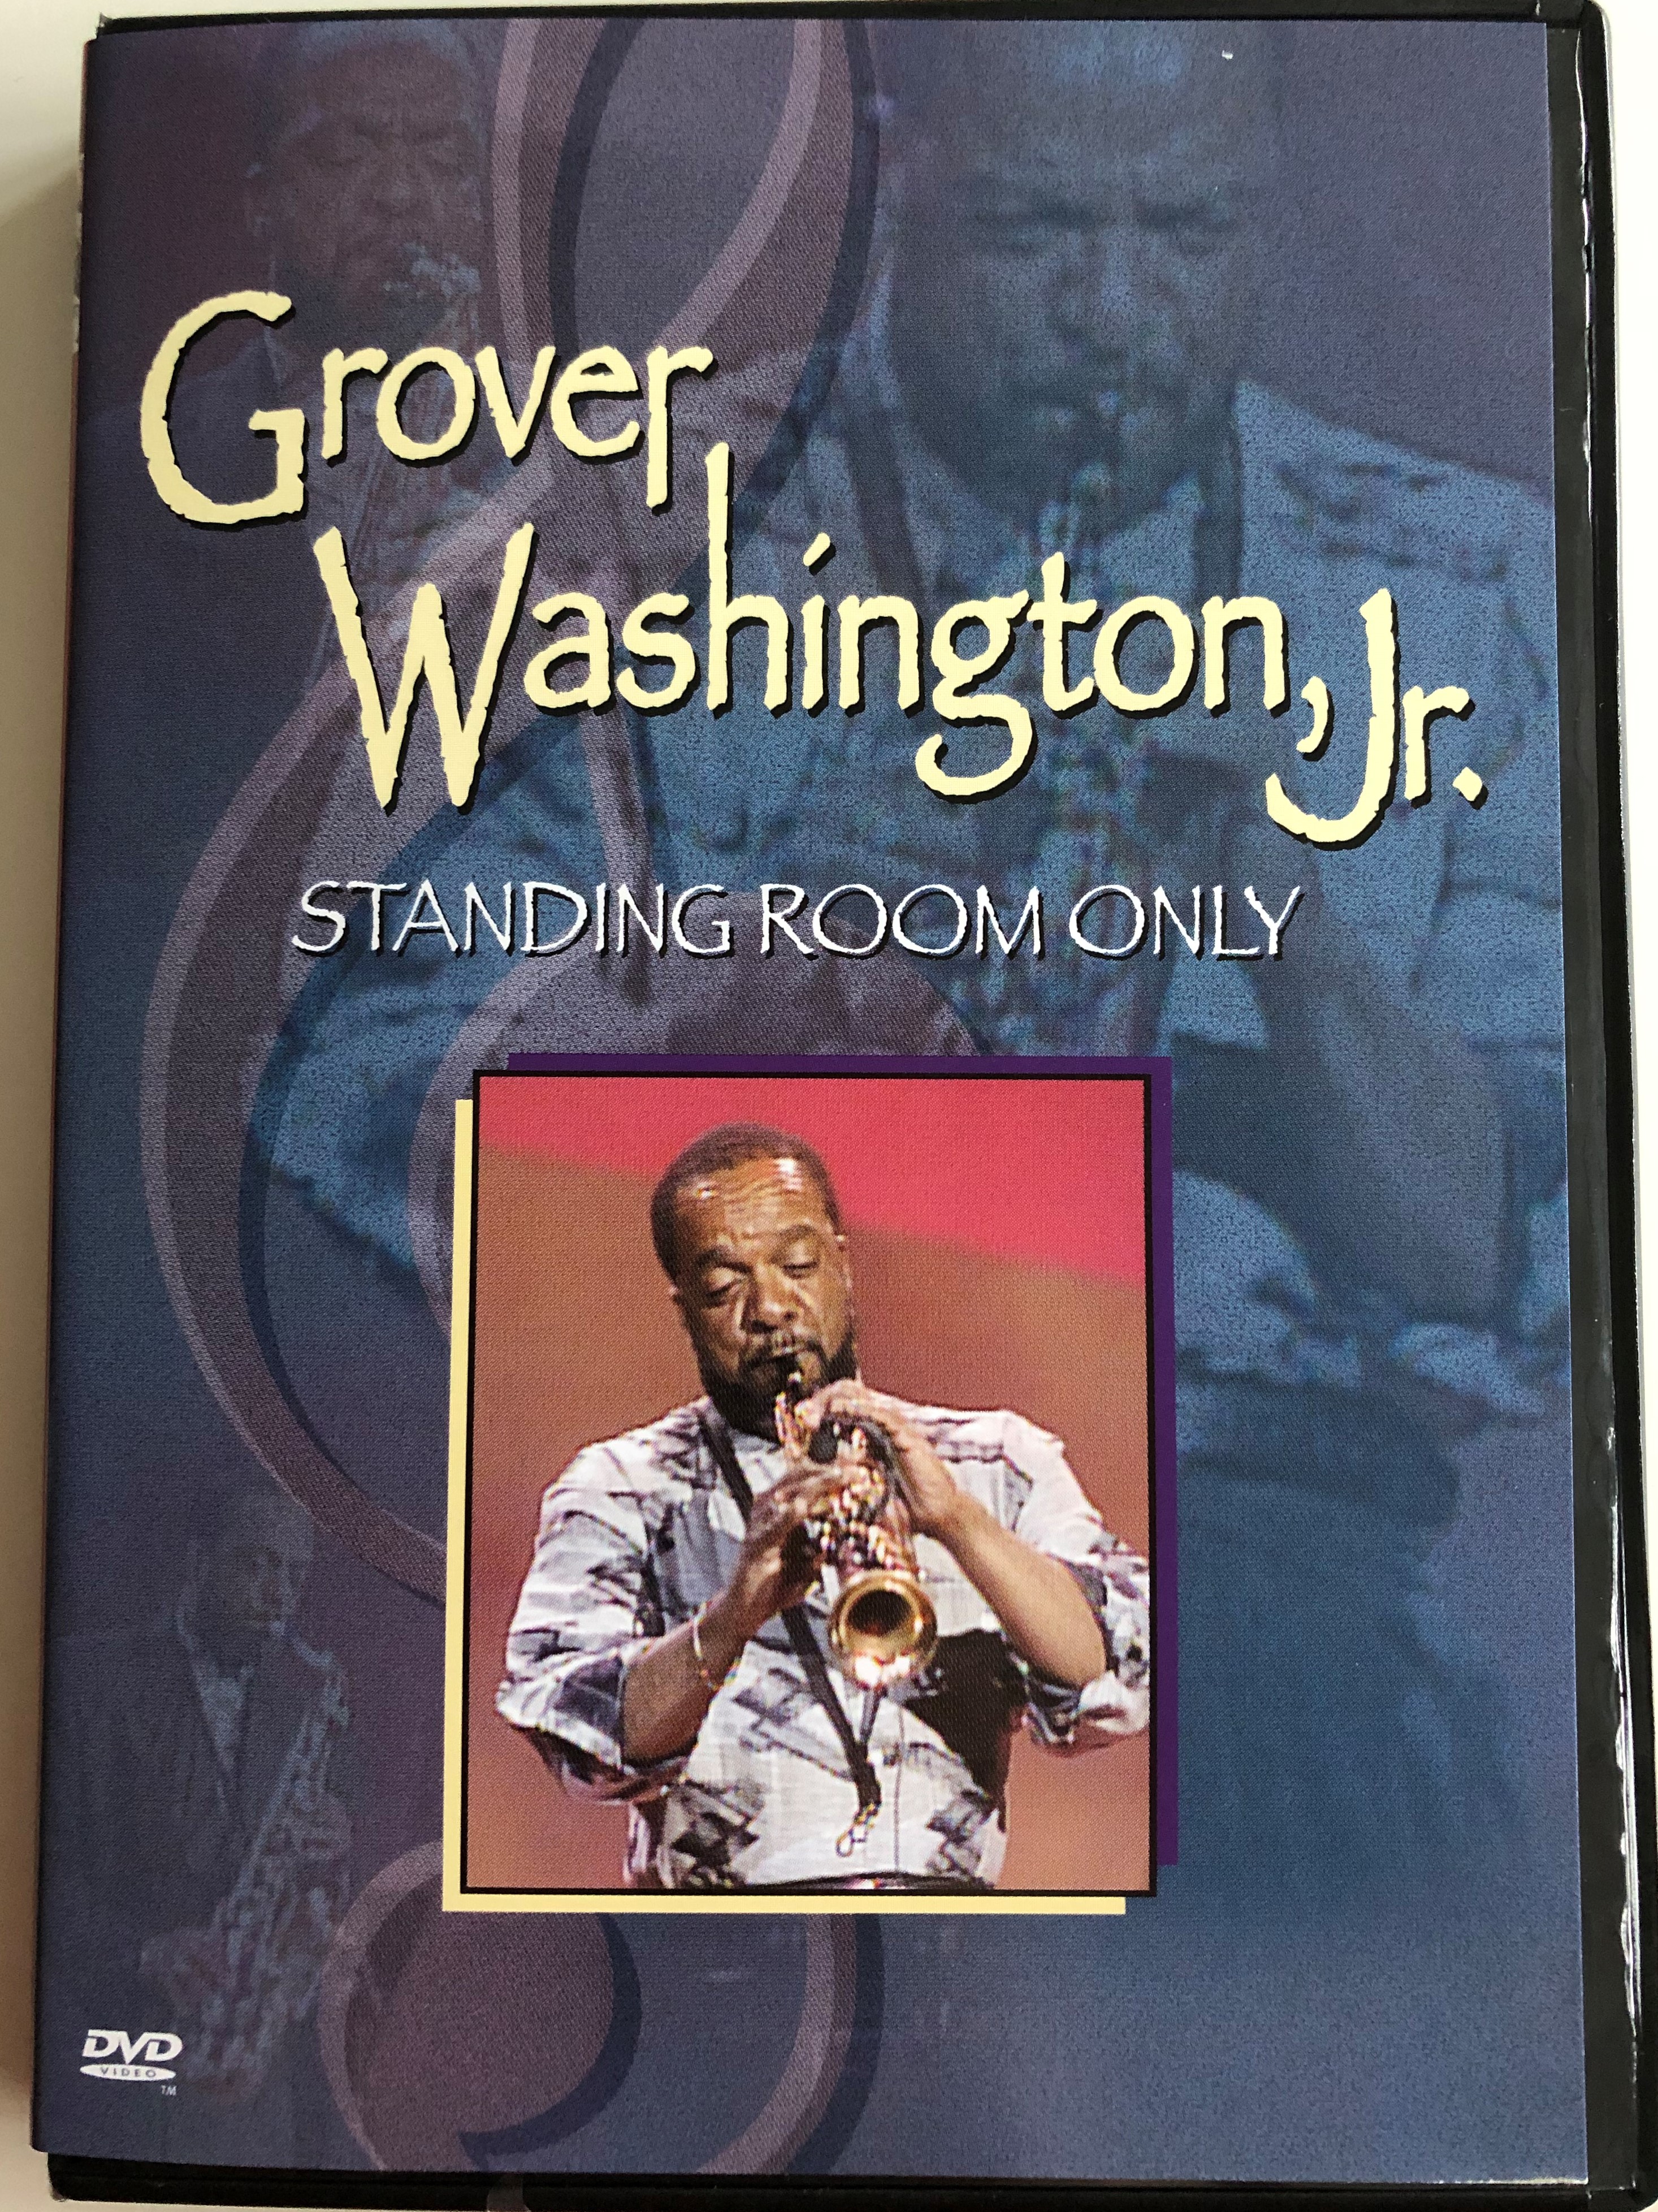 grover-washington-jr.-standing-room-only-dvd-1990-nice-and-easy-take-me-there-time-out-of-mind-1-.jpg